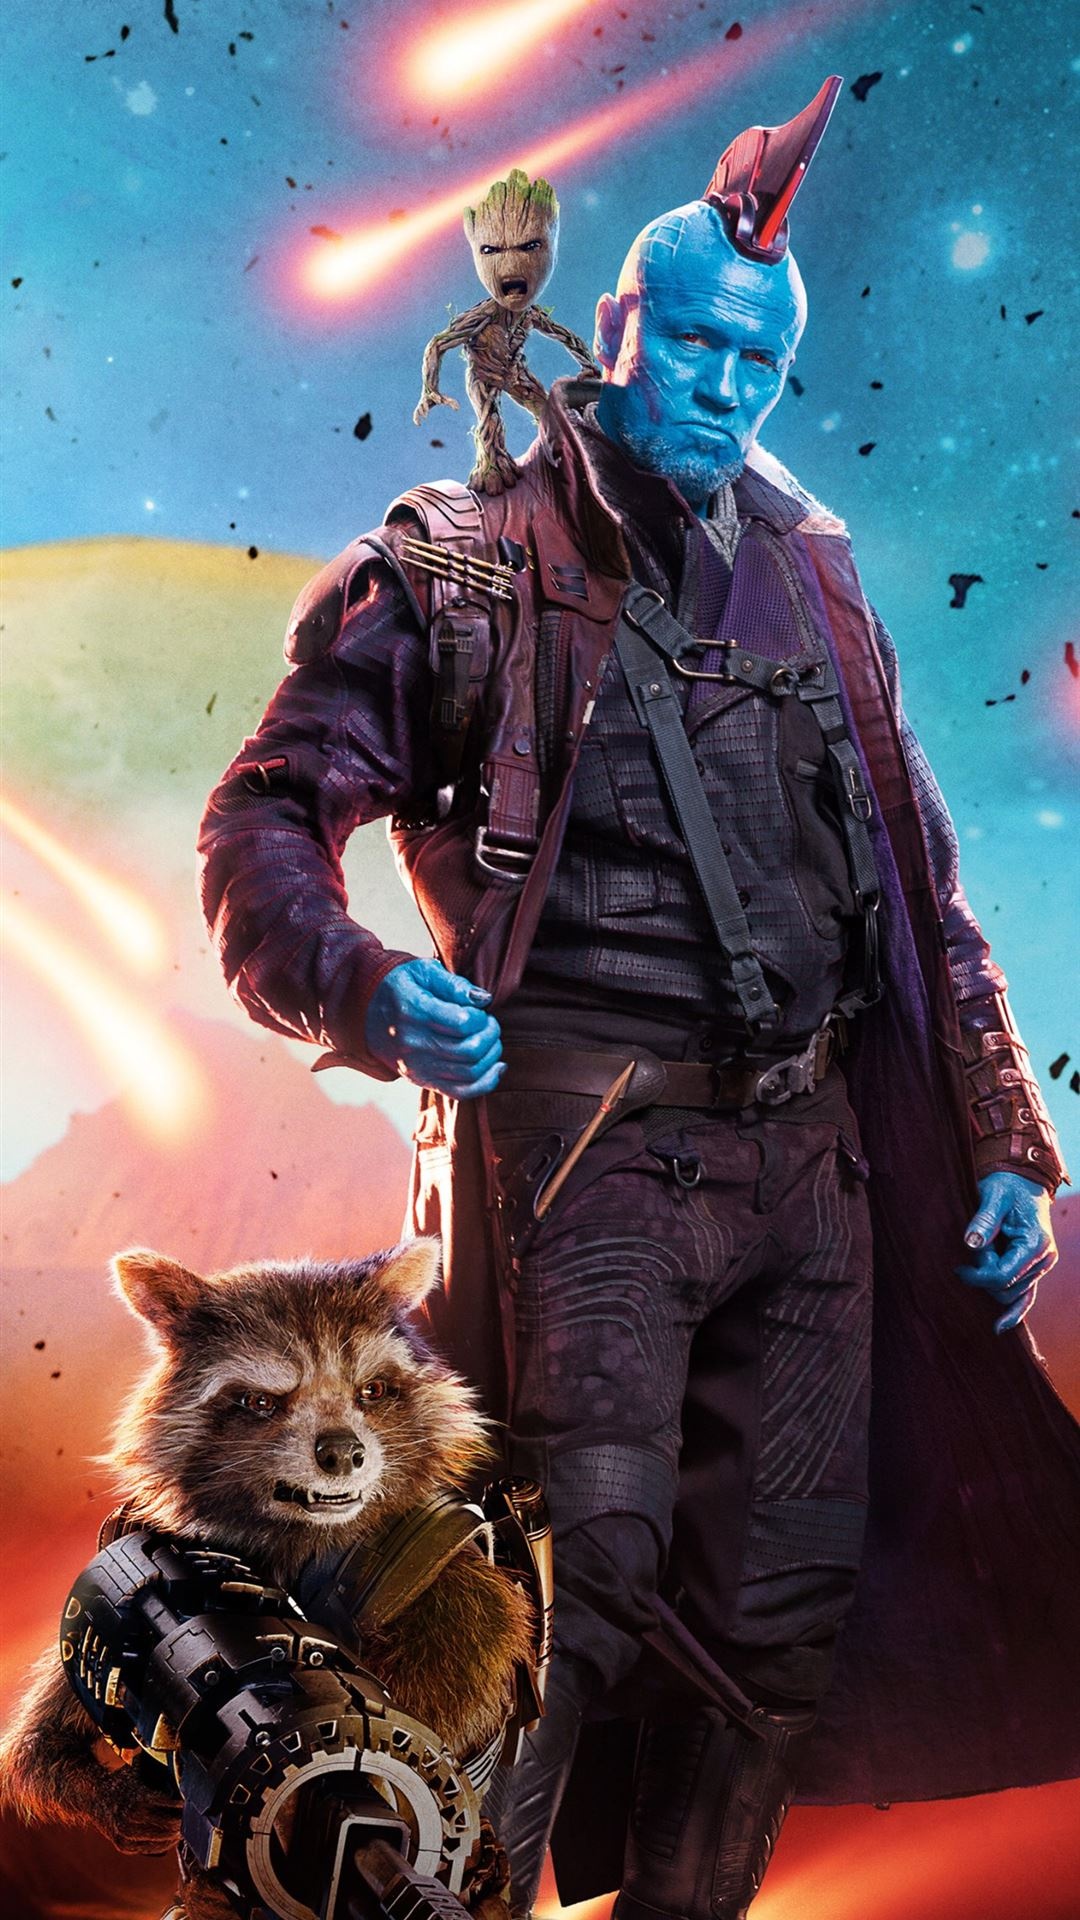 Guardians of the Galaxy, iPhone wallpapers, Free download, 1080x1920 Full HD Handy